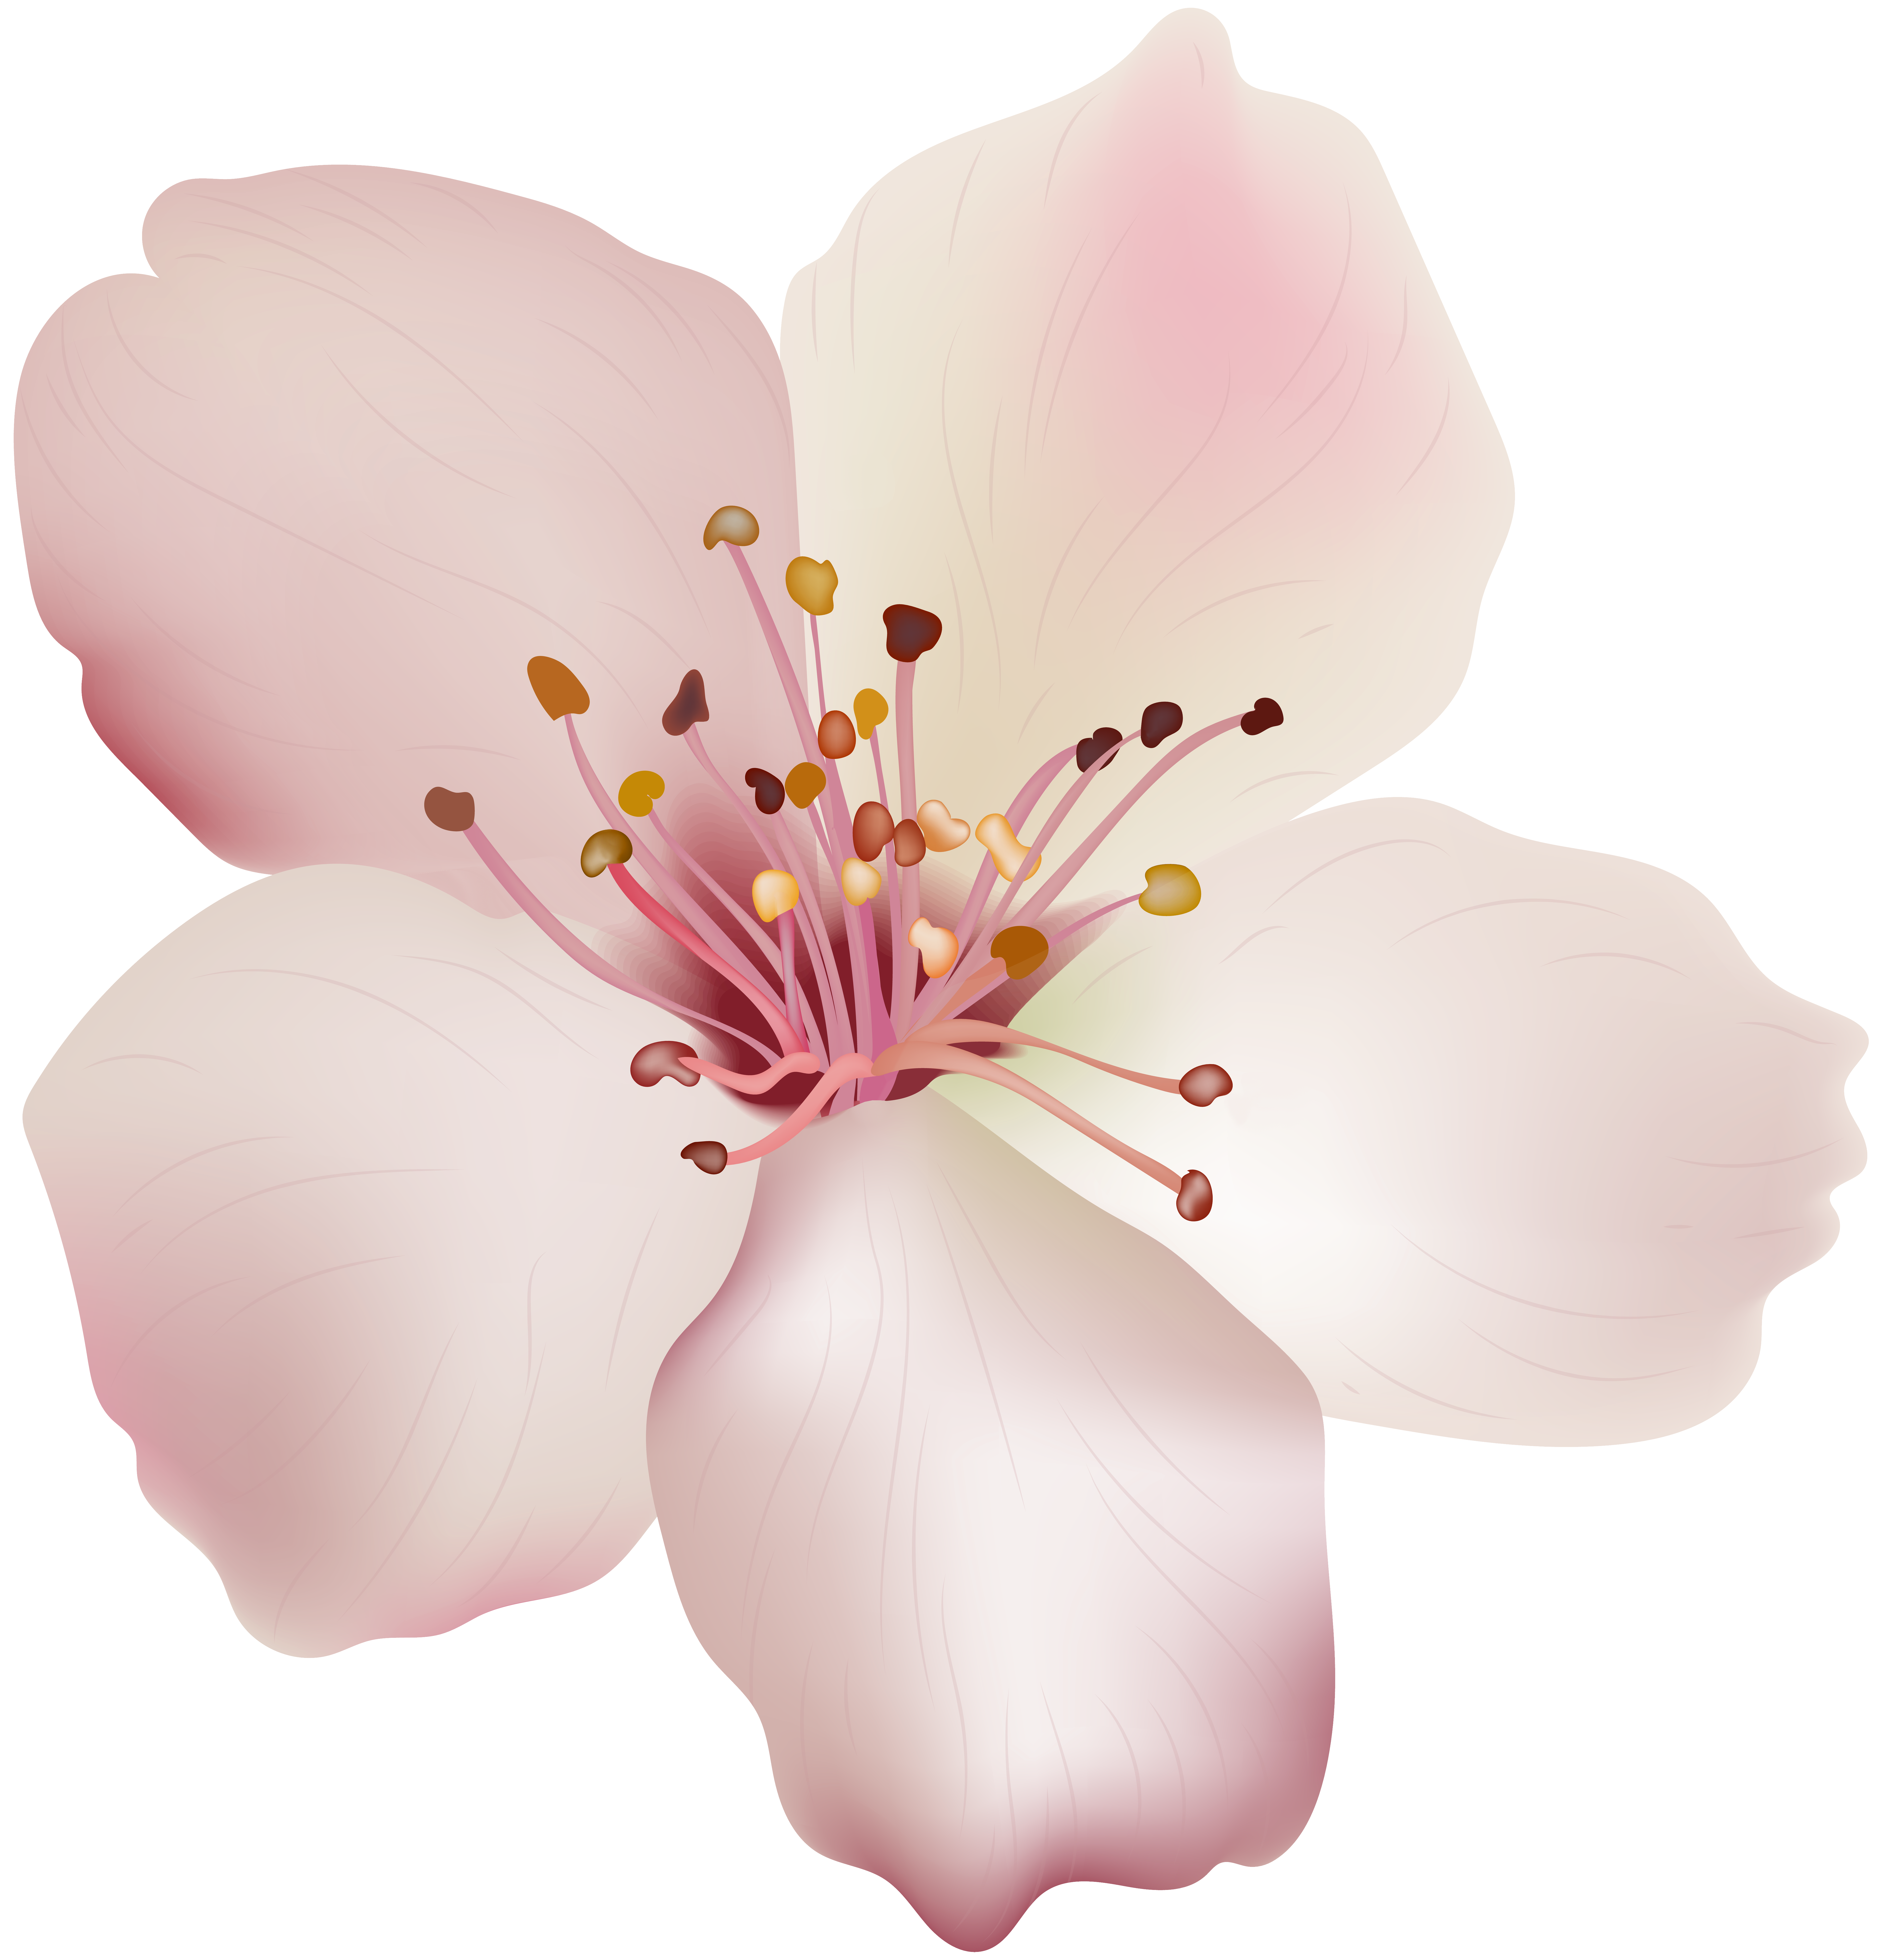 Spring Flower PNG Image | Gallery Yopriceville - High-Quality Images